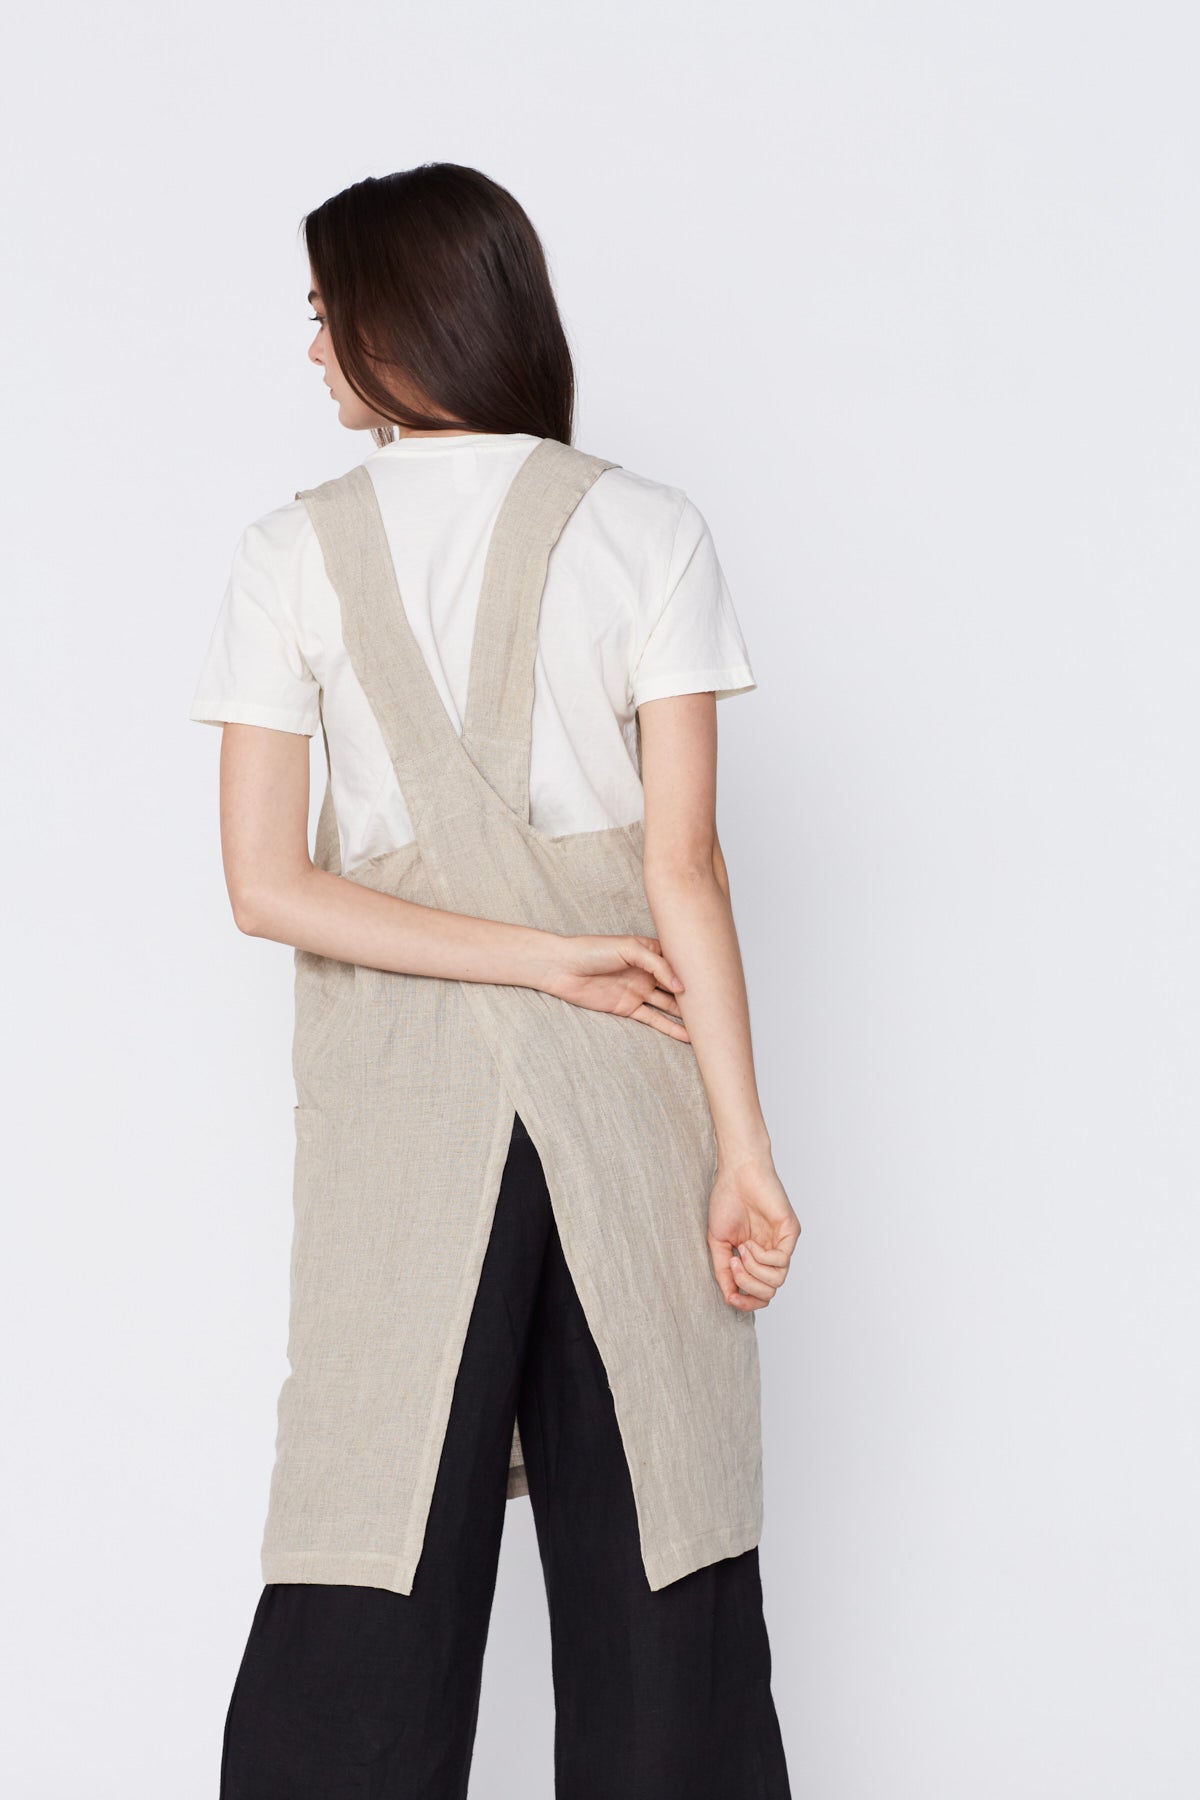 Linen Pinafore Apron in Natural. Made in Atlanta, ethically and sustainably, by slow fashion designer Megan Huntz. 